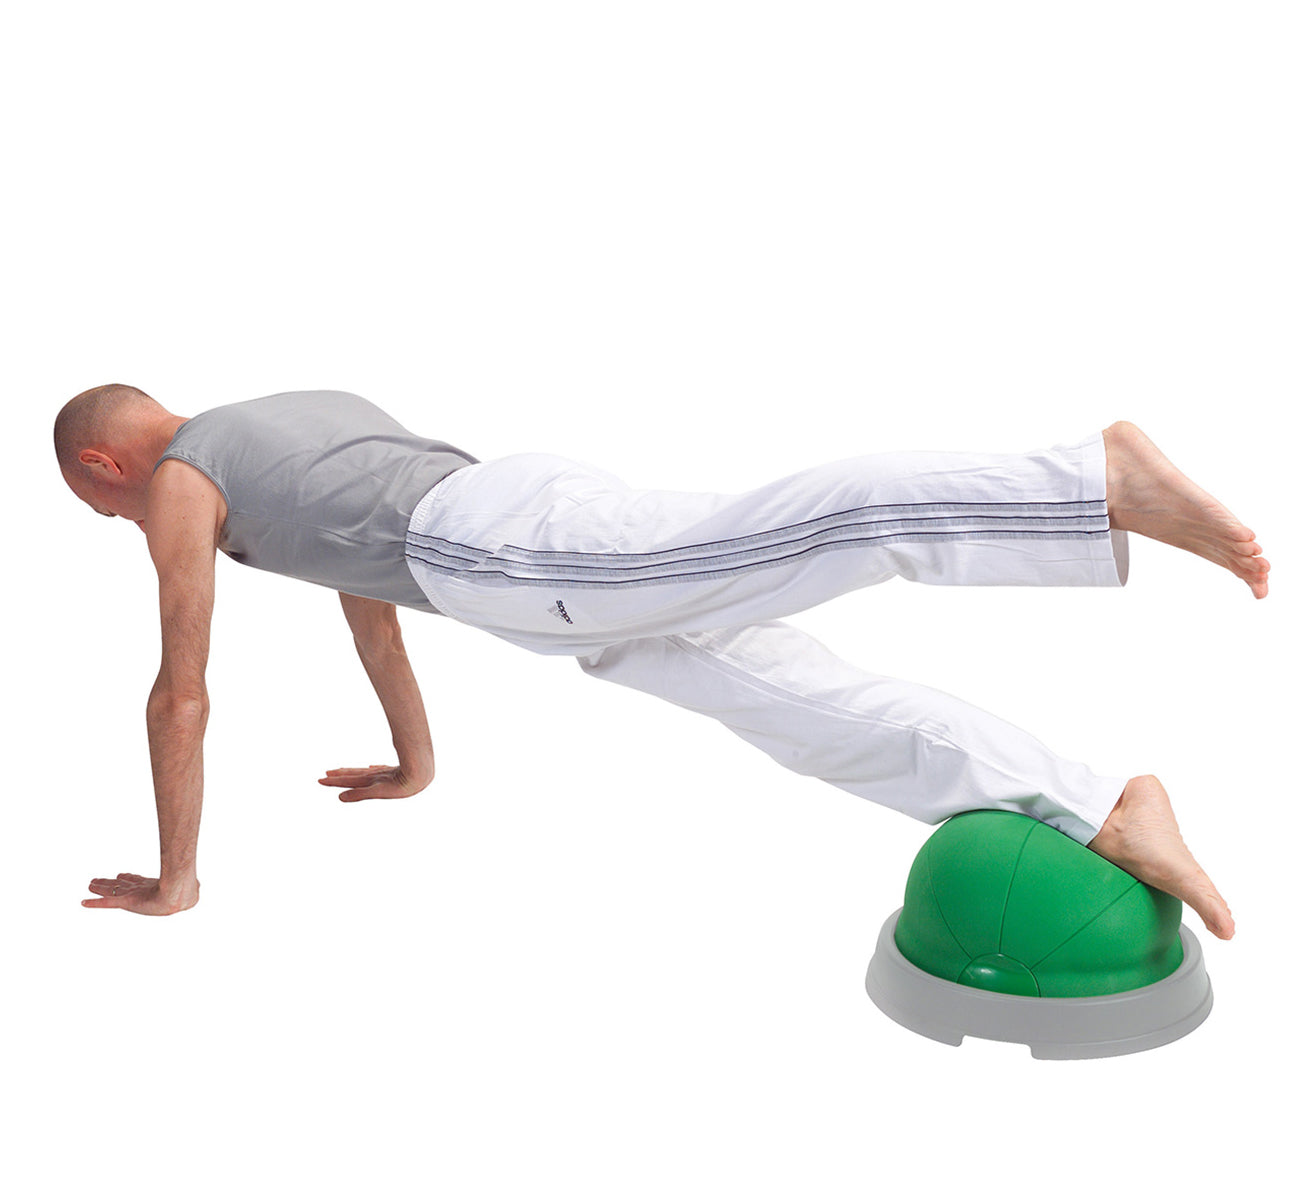 The Core Balance is a multi-functional tool, which is suitable for different kinds of training: from fitness to post-injury knee and ankle rehab. It is a soft green inflatable half ball with a hard base. You can inflate the product to the needed stability level. Useful aid to improve balance and coordination, it is also recommendable for stretching, flexibility and stabilization exercises.